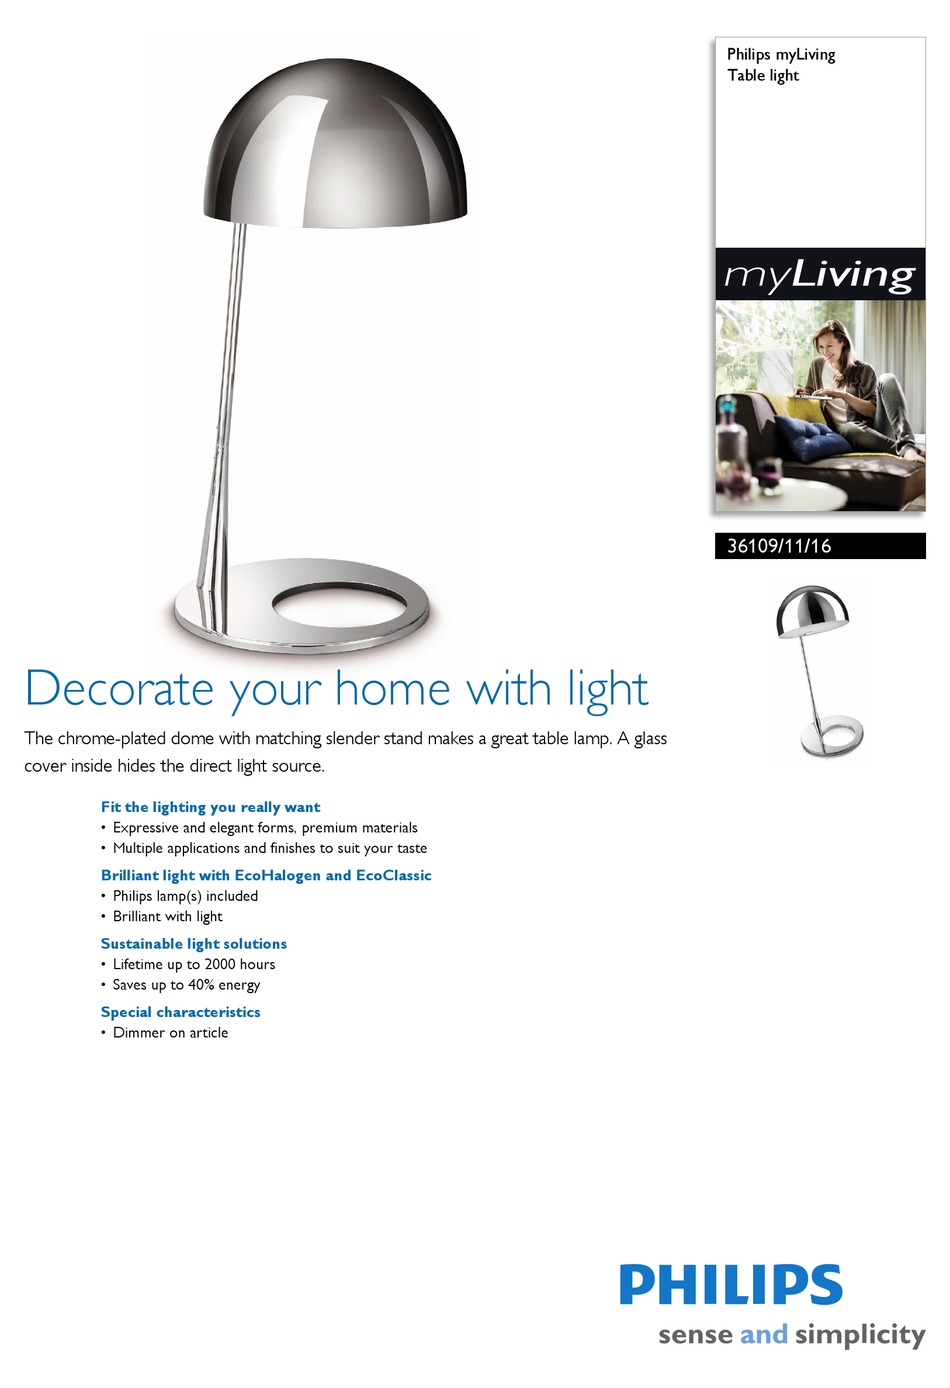 Philips Myliving 36109 11 16, Philips Myliving Table Lamp